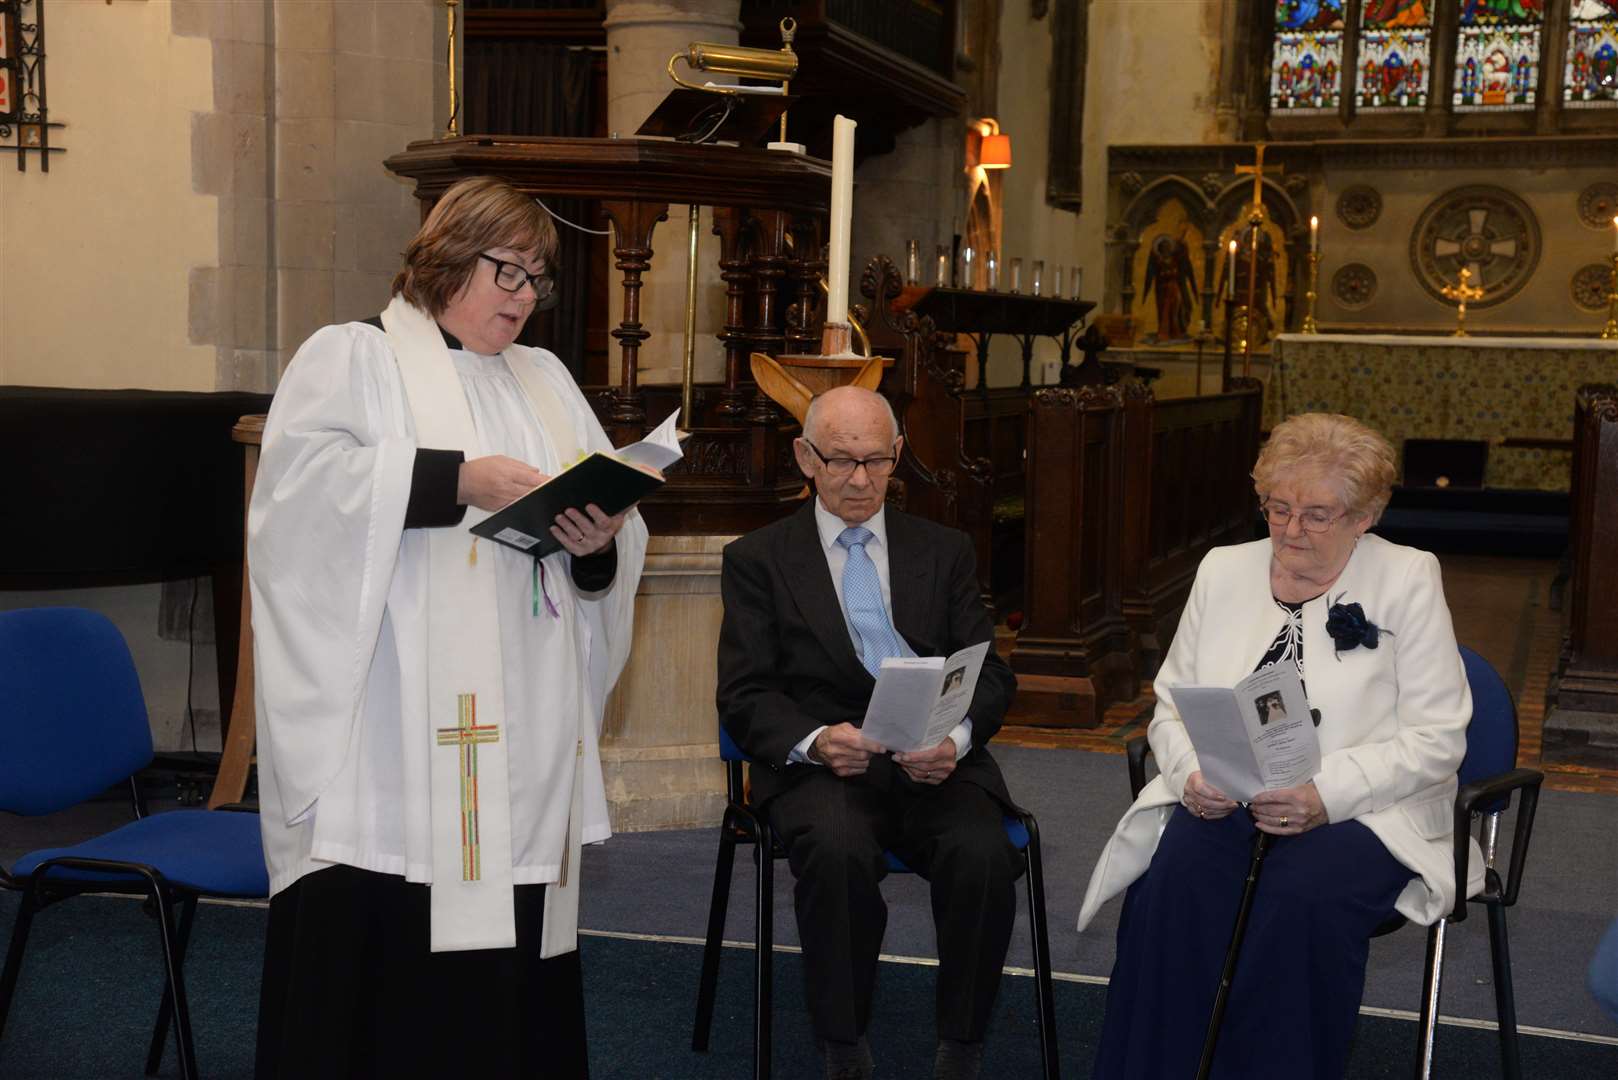 The Rev Lesley Jones with Bill and Jean Ashworth during the service at which they renewed their wedding vows at St Michael's Church, Sittingbourne on Thursday. Picture: Chris Davey. (31975251)